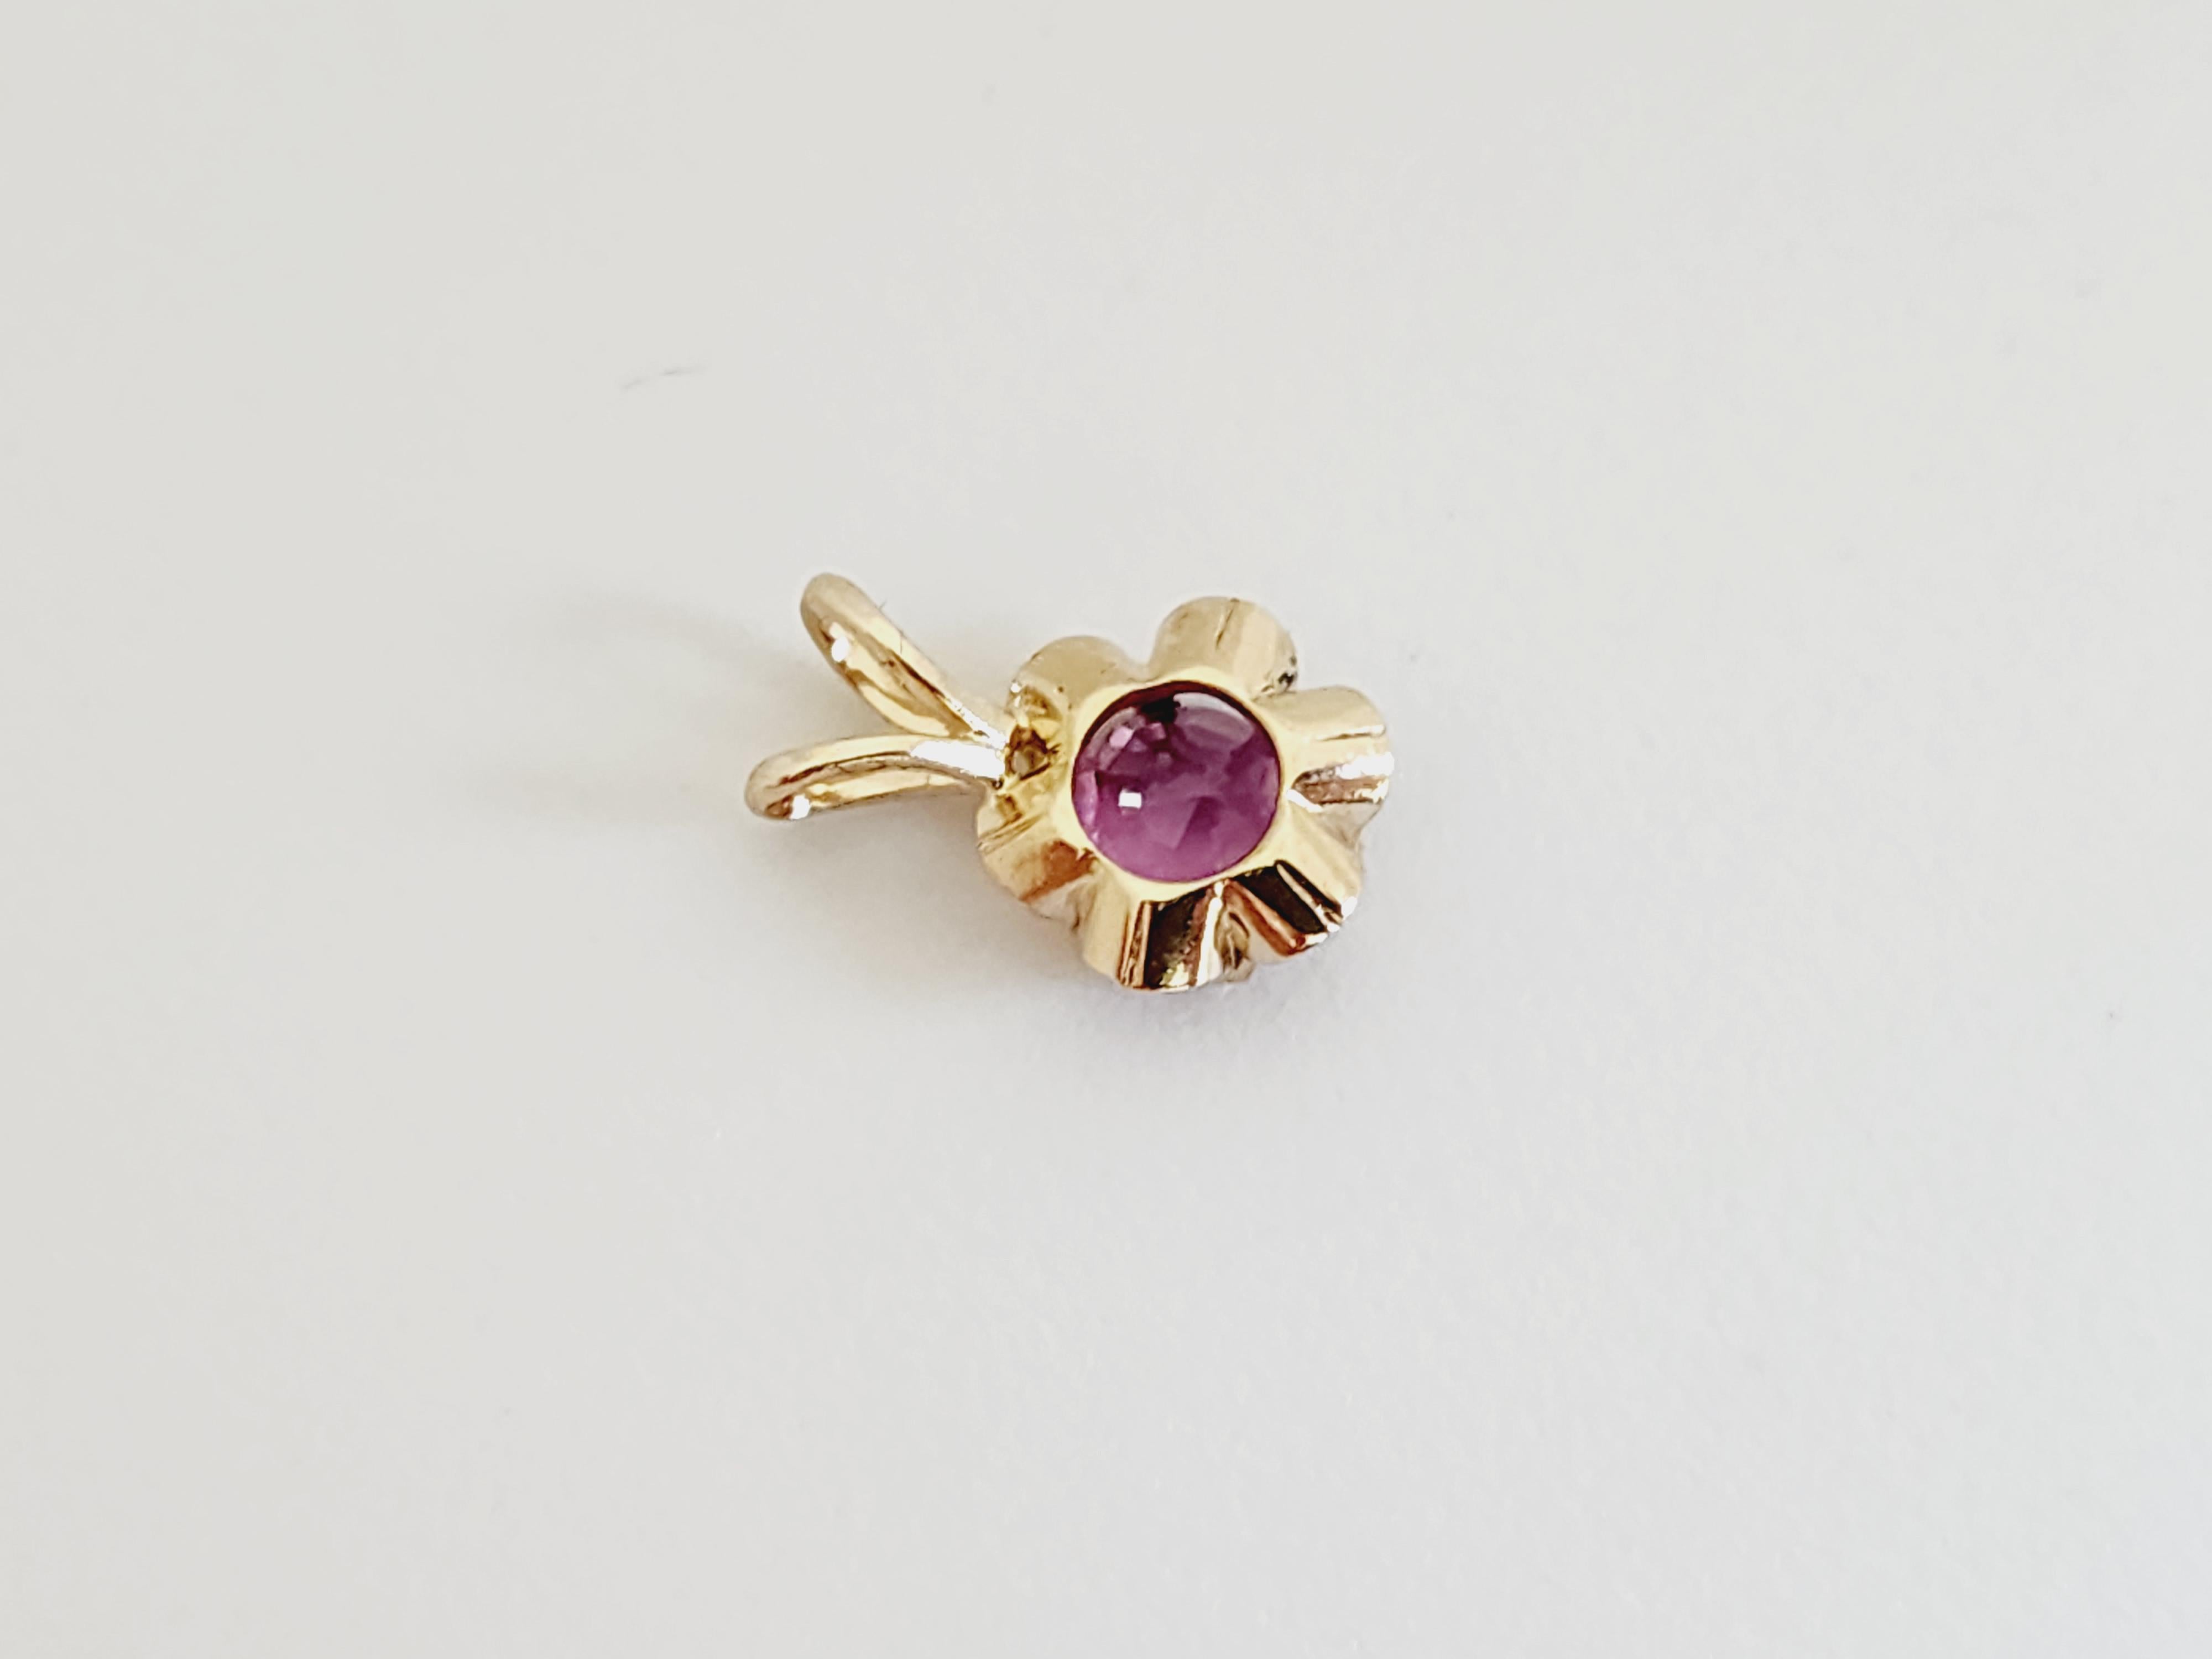 0.58 Carat Pink Sapphire Pendant 14 Karat Yellow Gold. Pendant measures approximately 0.45 inch length and 0.30 inch wide. 

(Pendant Only-Chain sold separately)